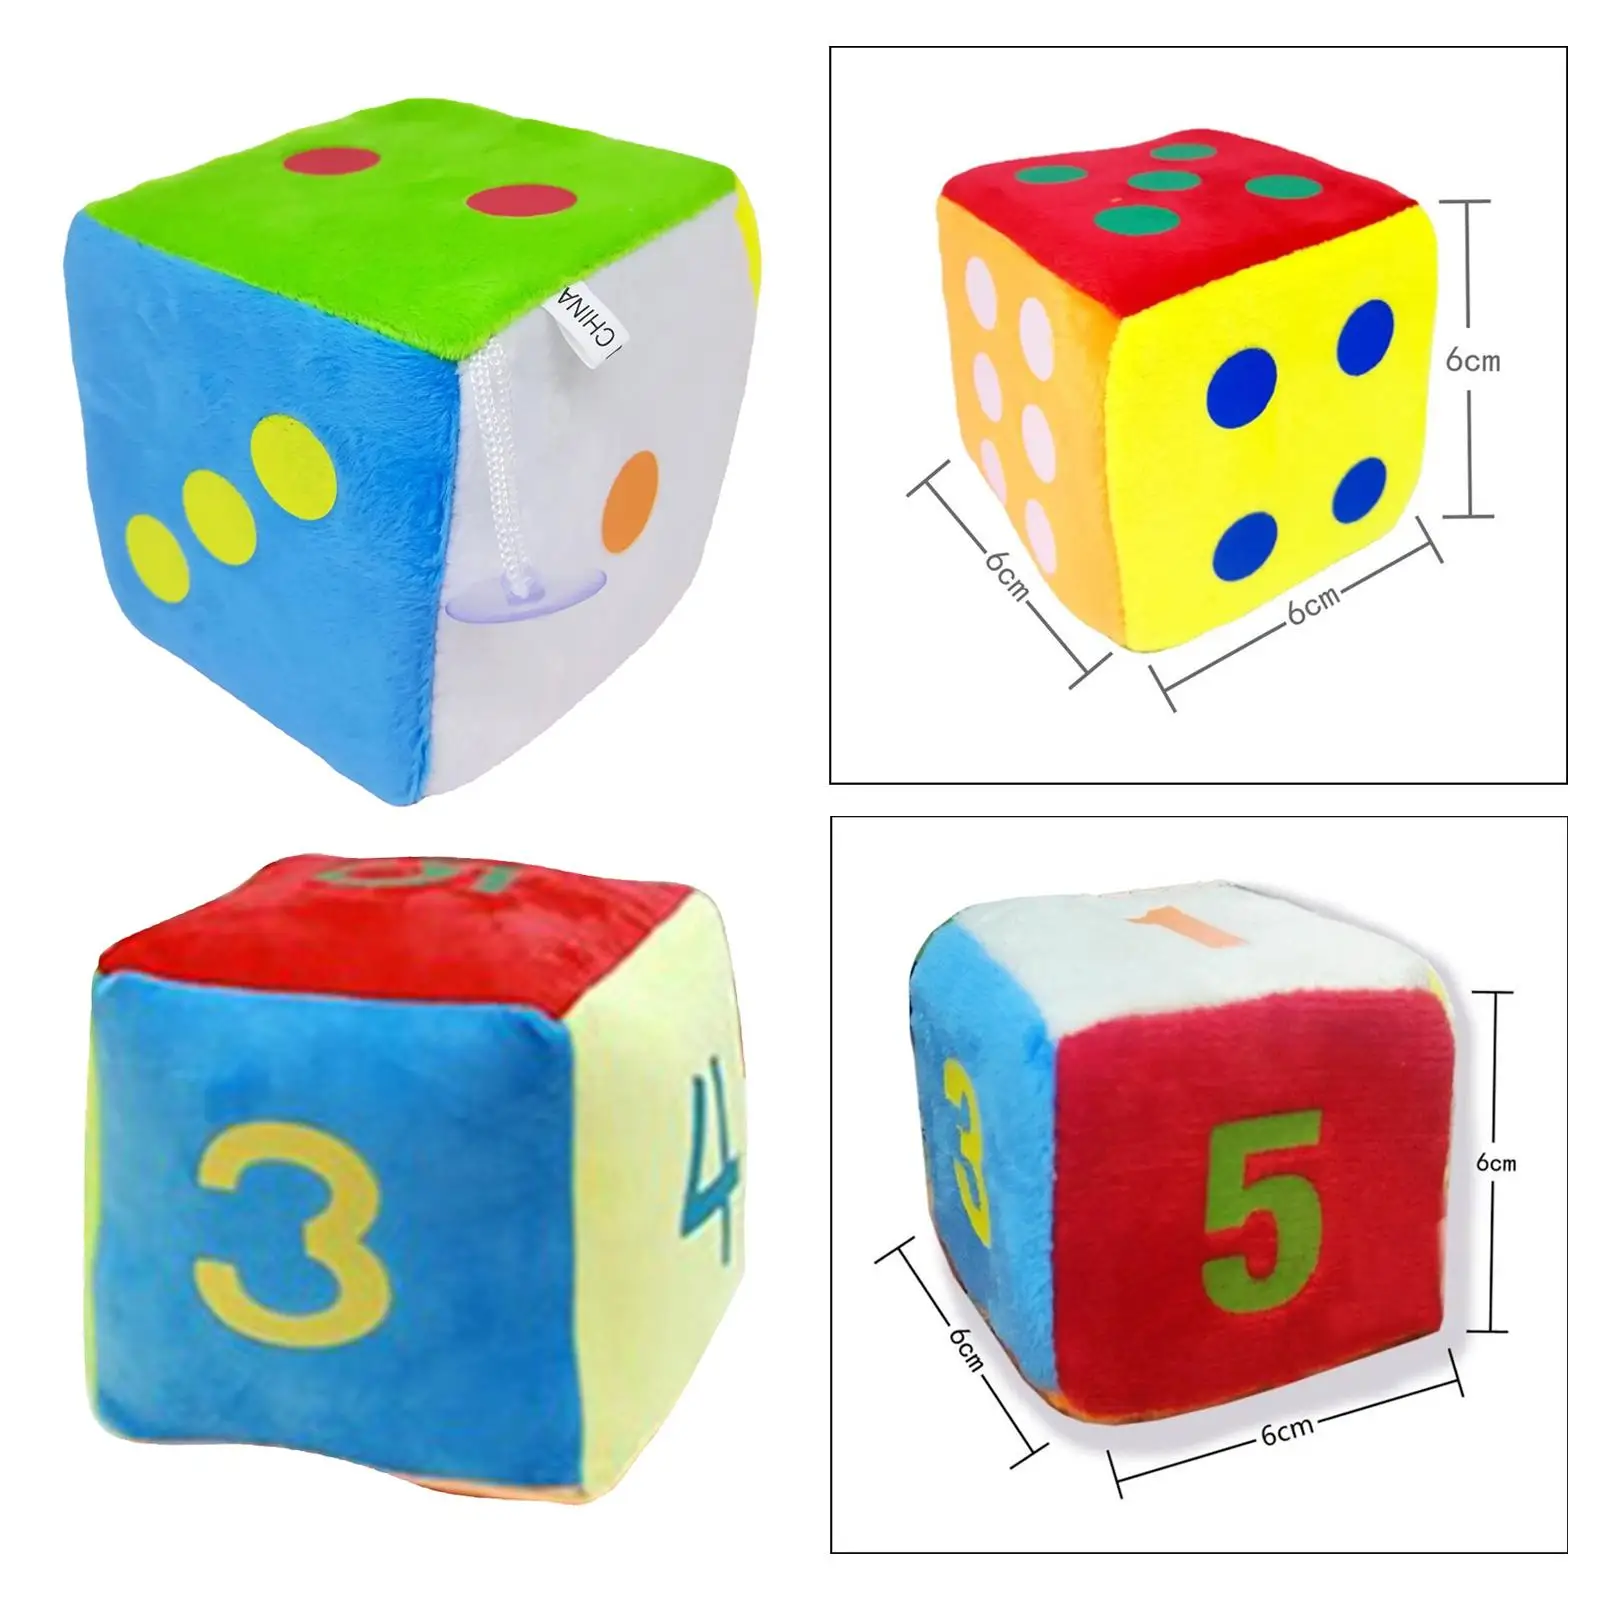 6 Pieces Hanging Plush Dice Decoration Early Education Toy Enlightenment Learning Dice for Parent Child Interactive Game  Games